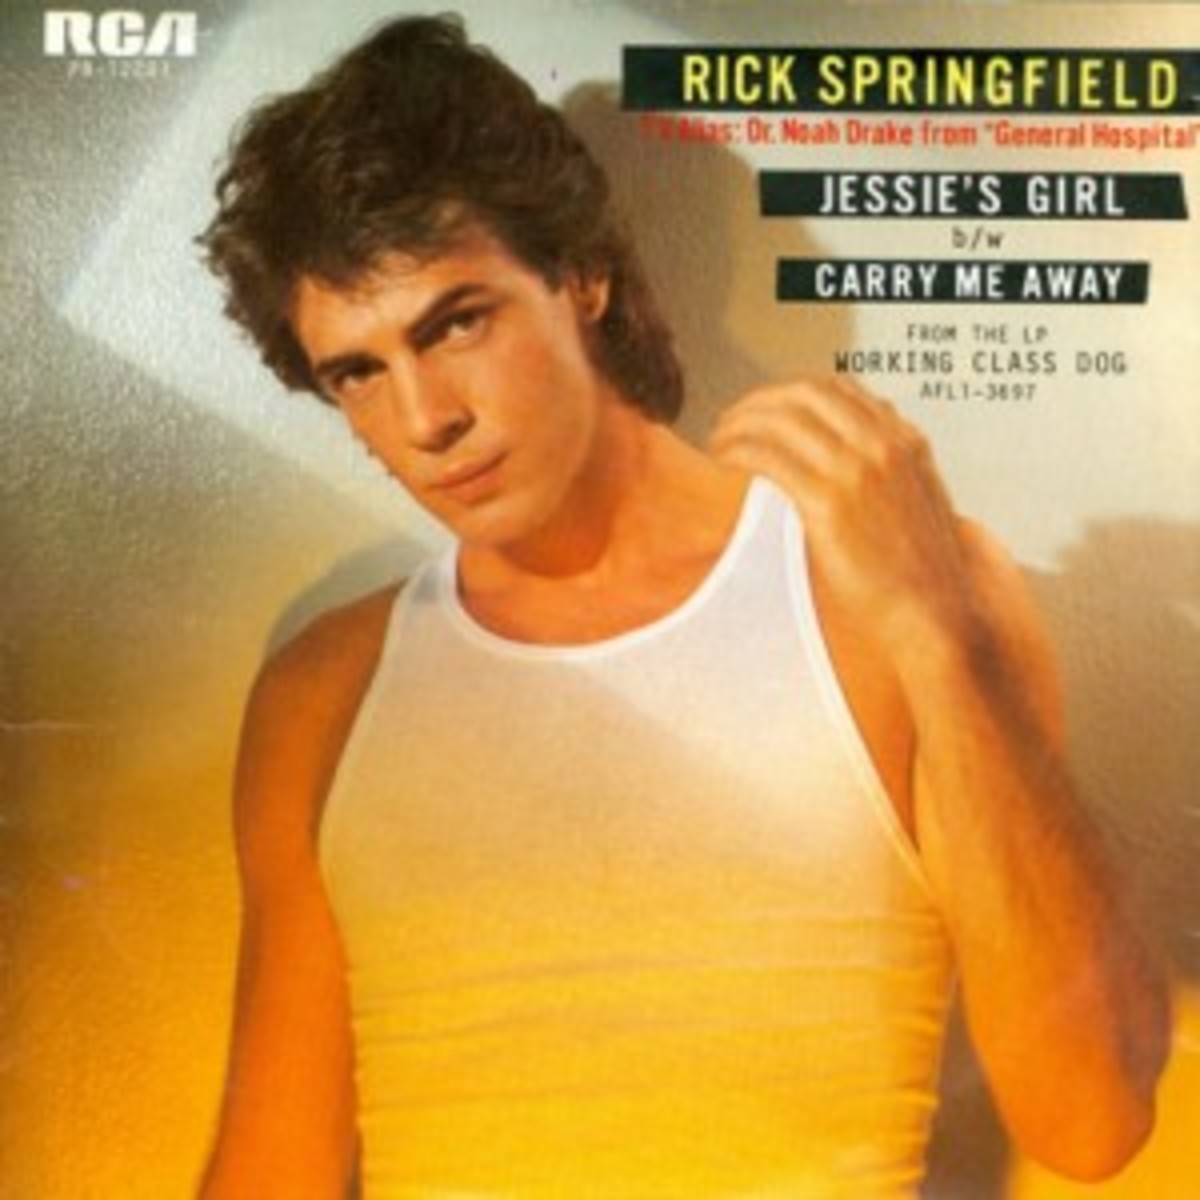 Rick Springfield Jessie's Girl picture sleeve